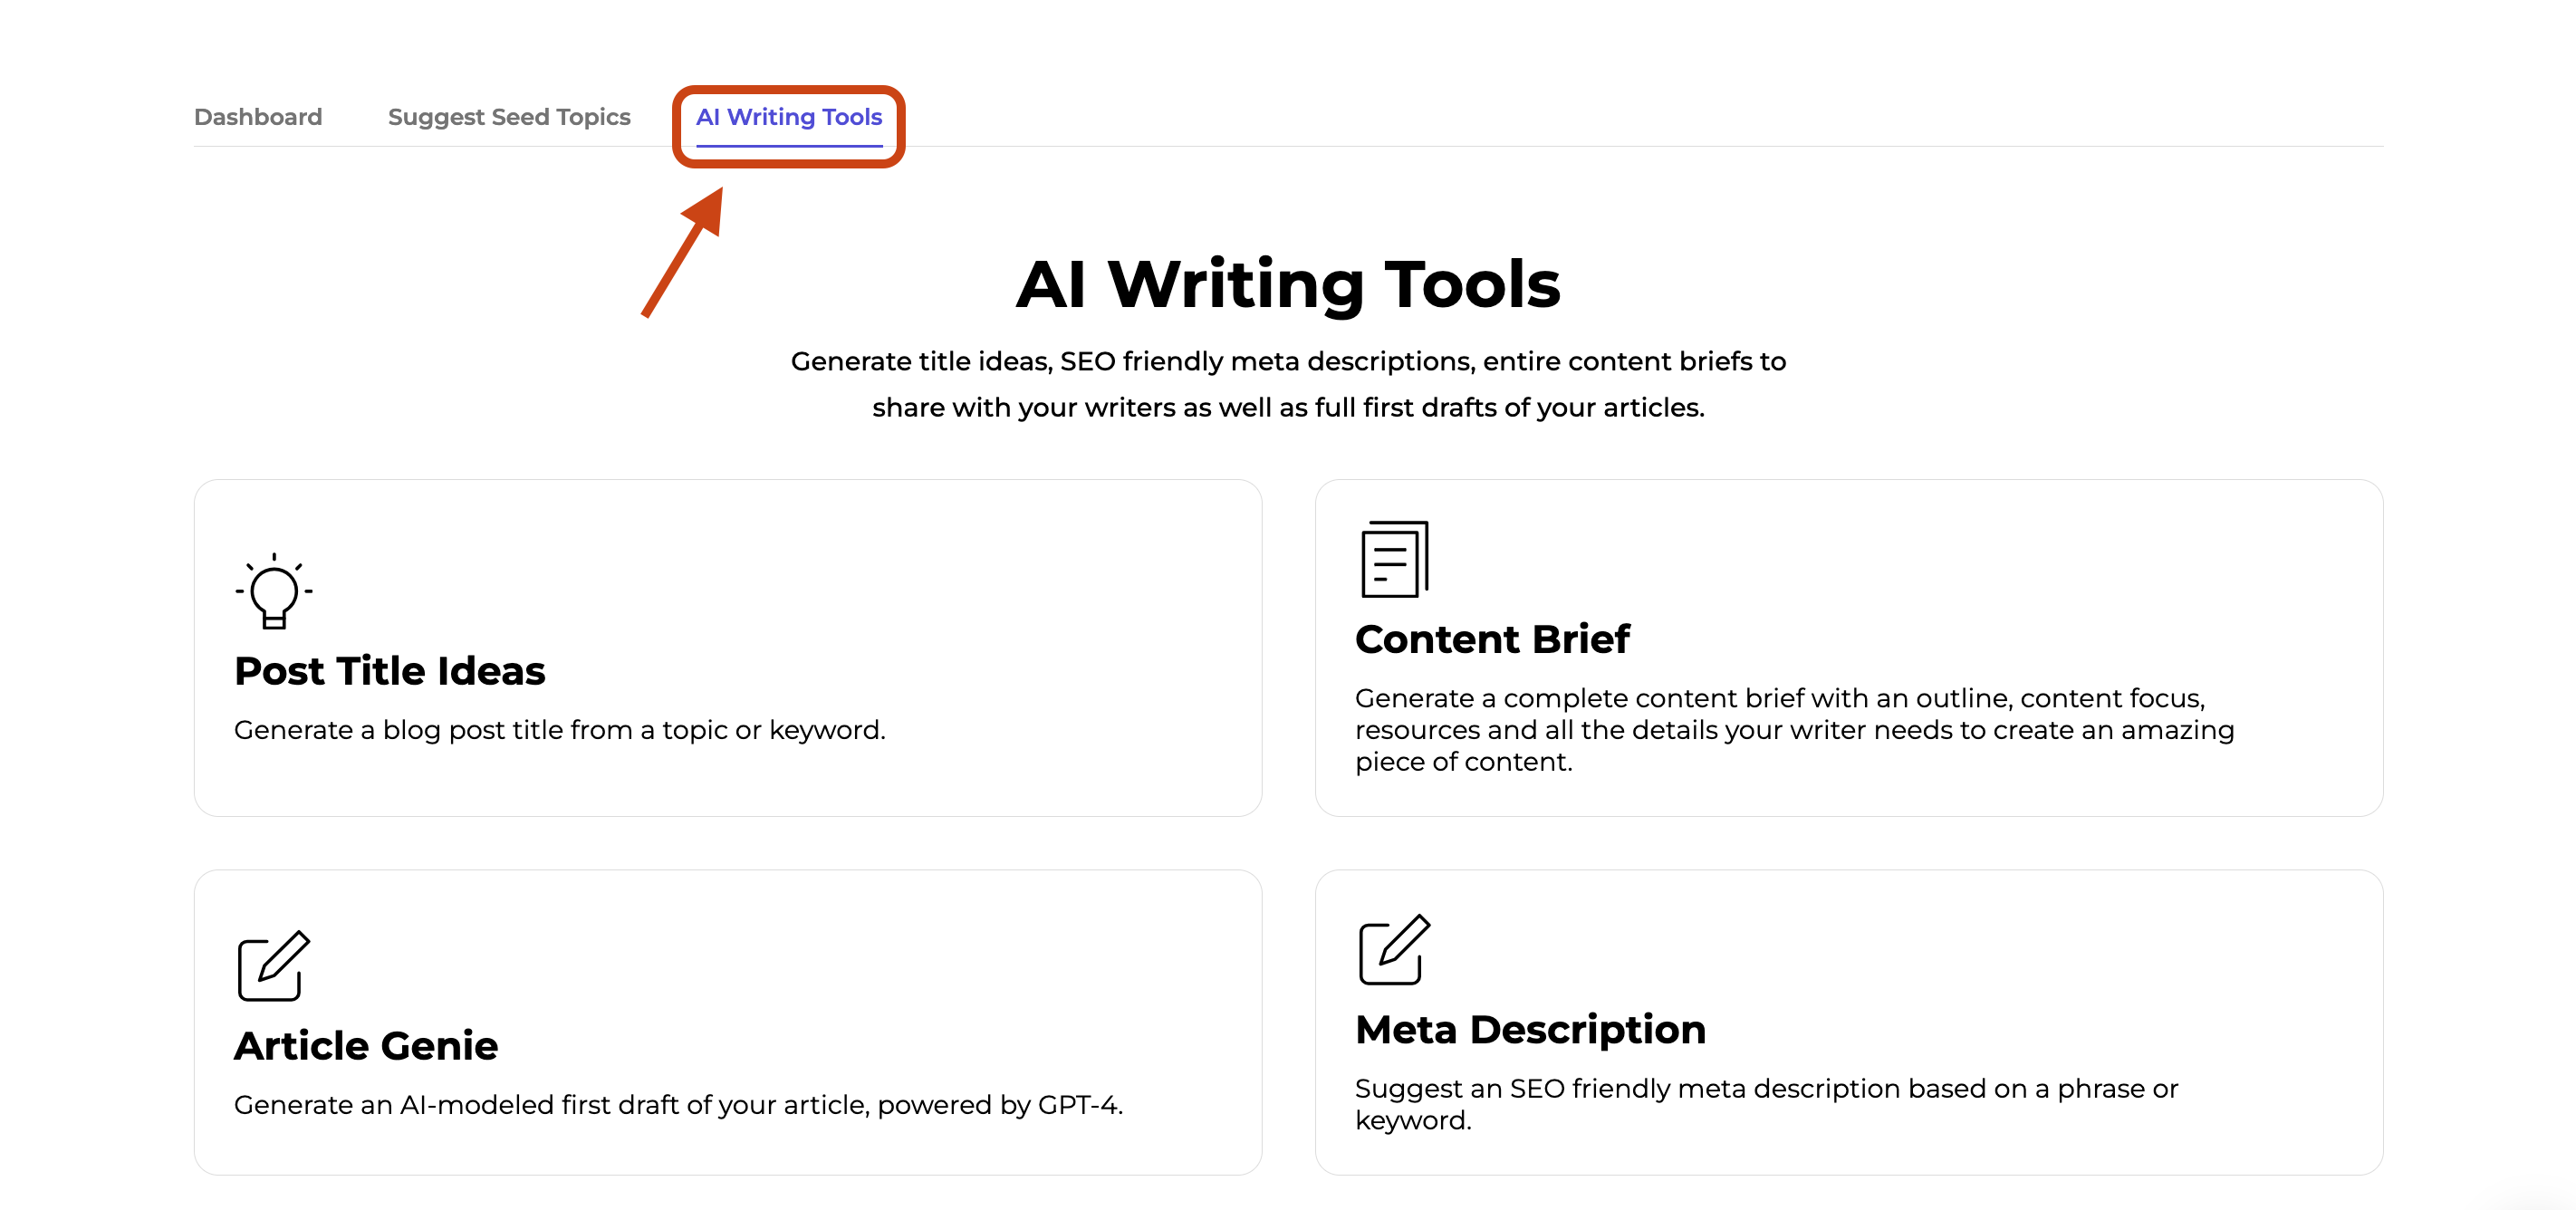 AI Writing Tools tab interface, with a red arrow pointing to where the tab is located.